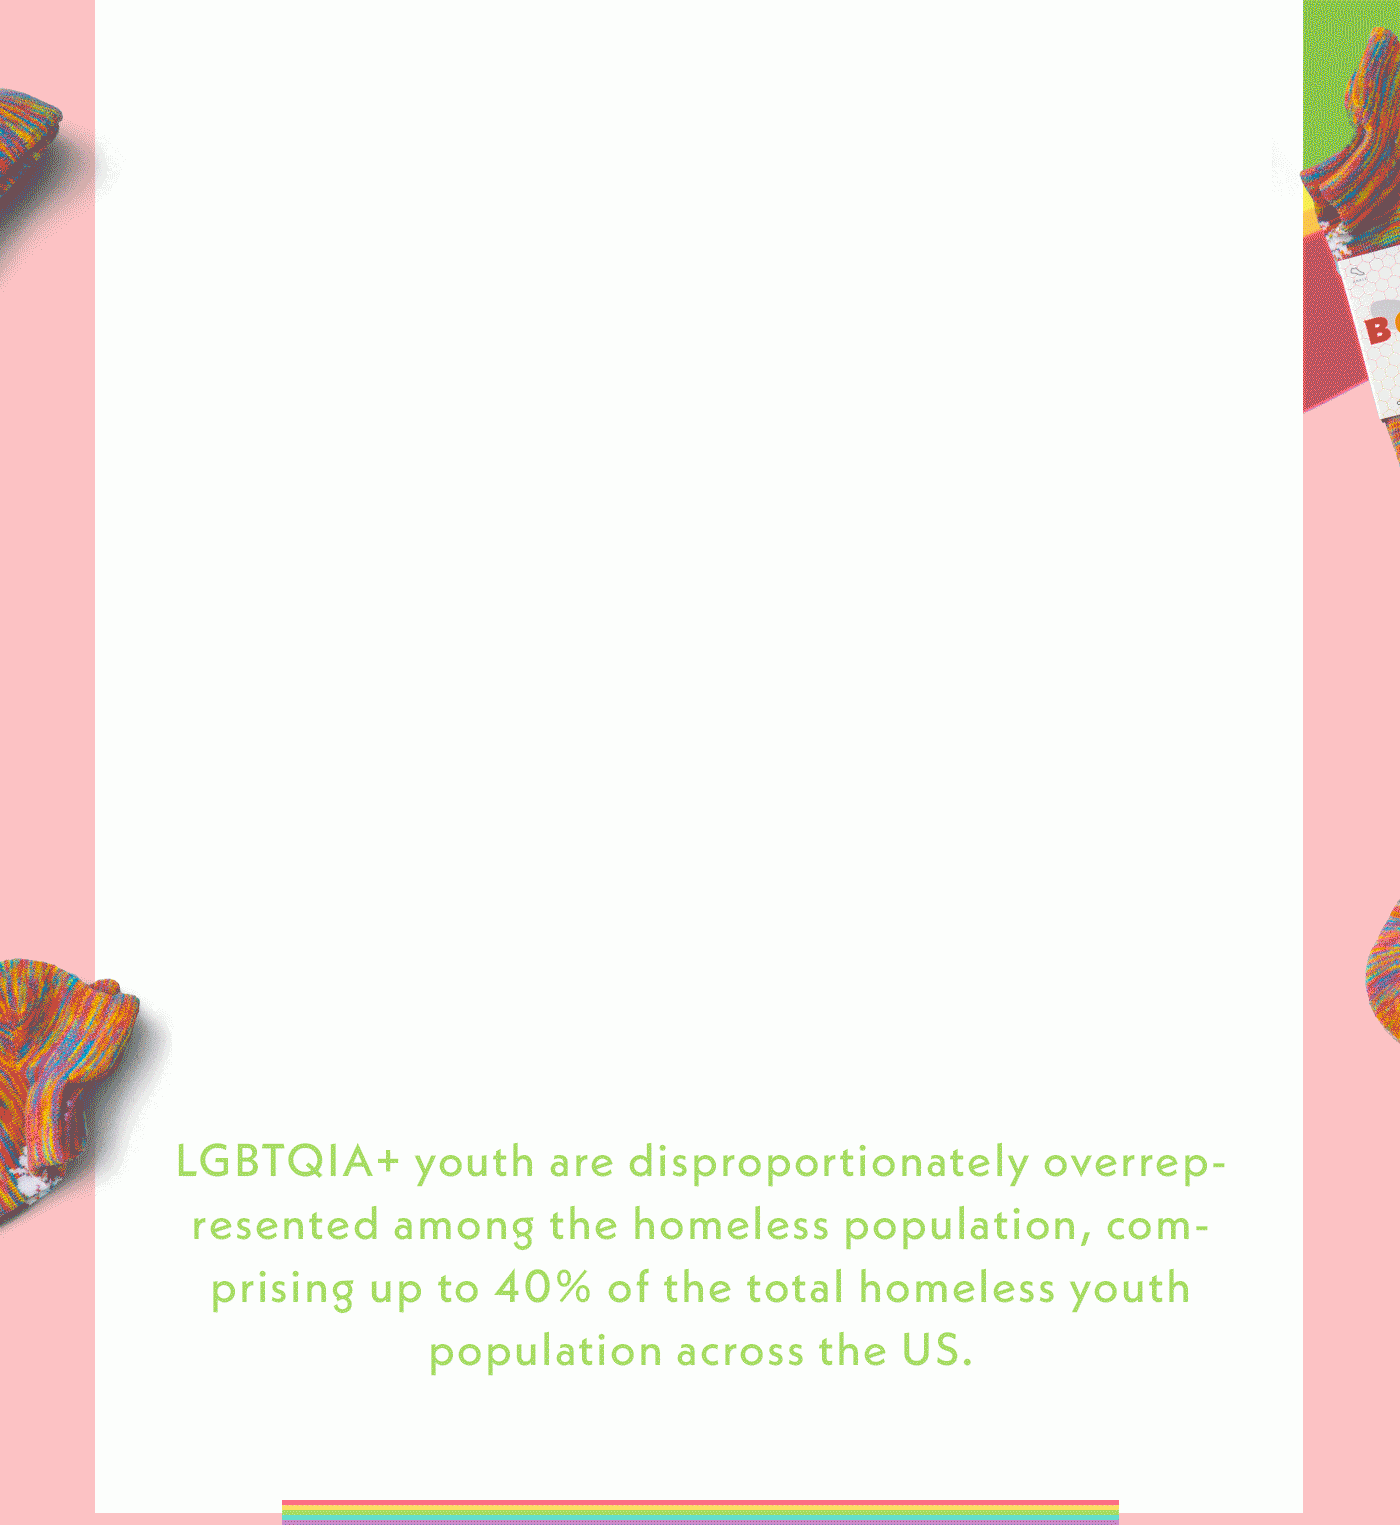 LGBTQIA+ youth are disproportionately overrepresented among the homeless population, comprising up to 40% of the total homeless youth population across the US.